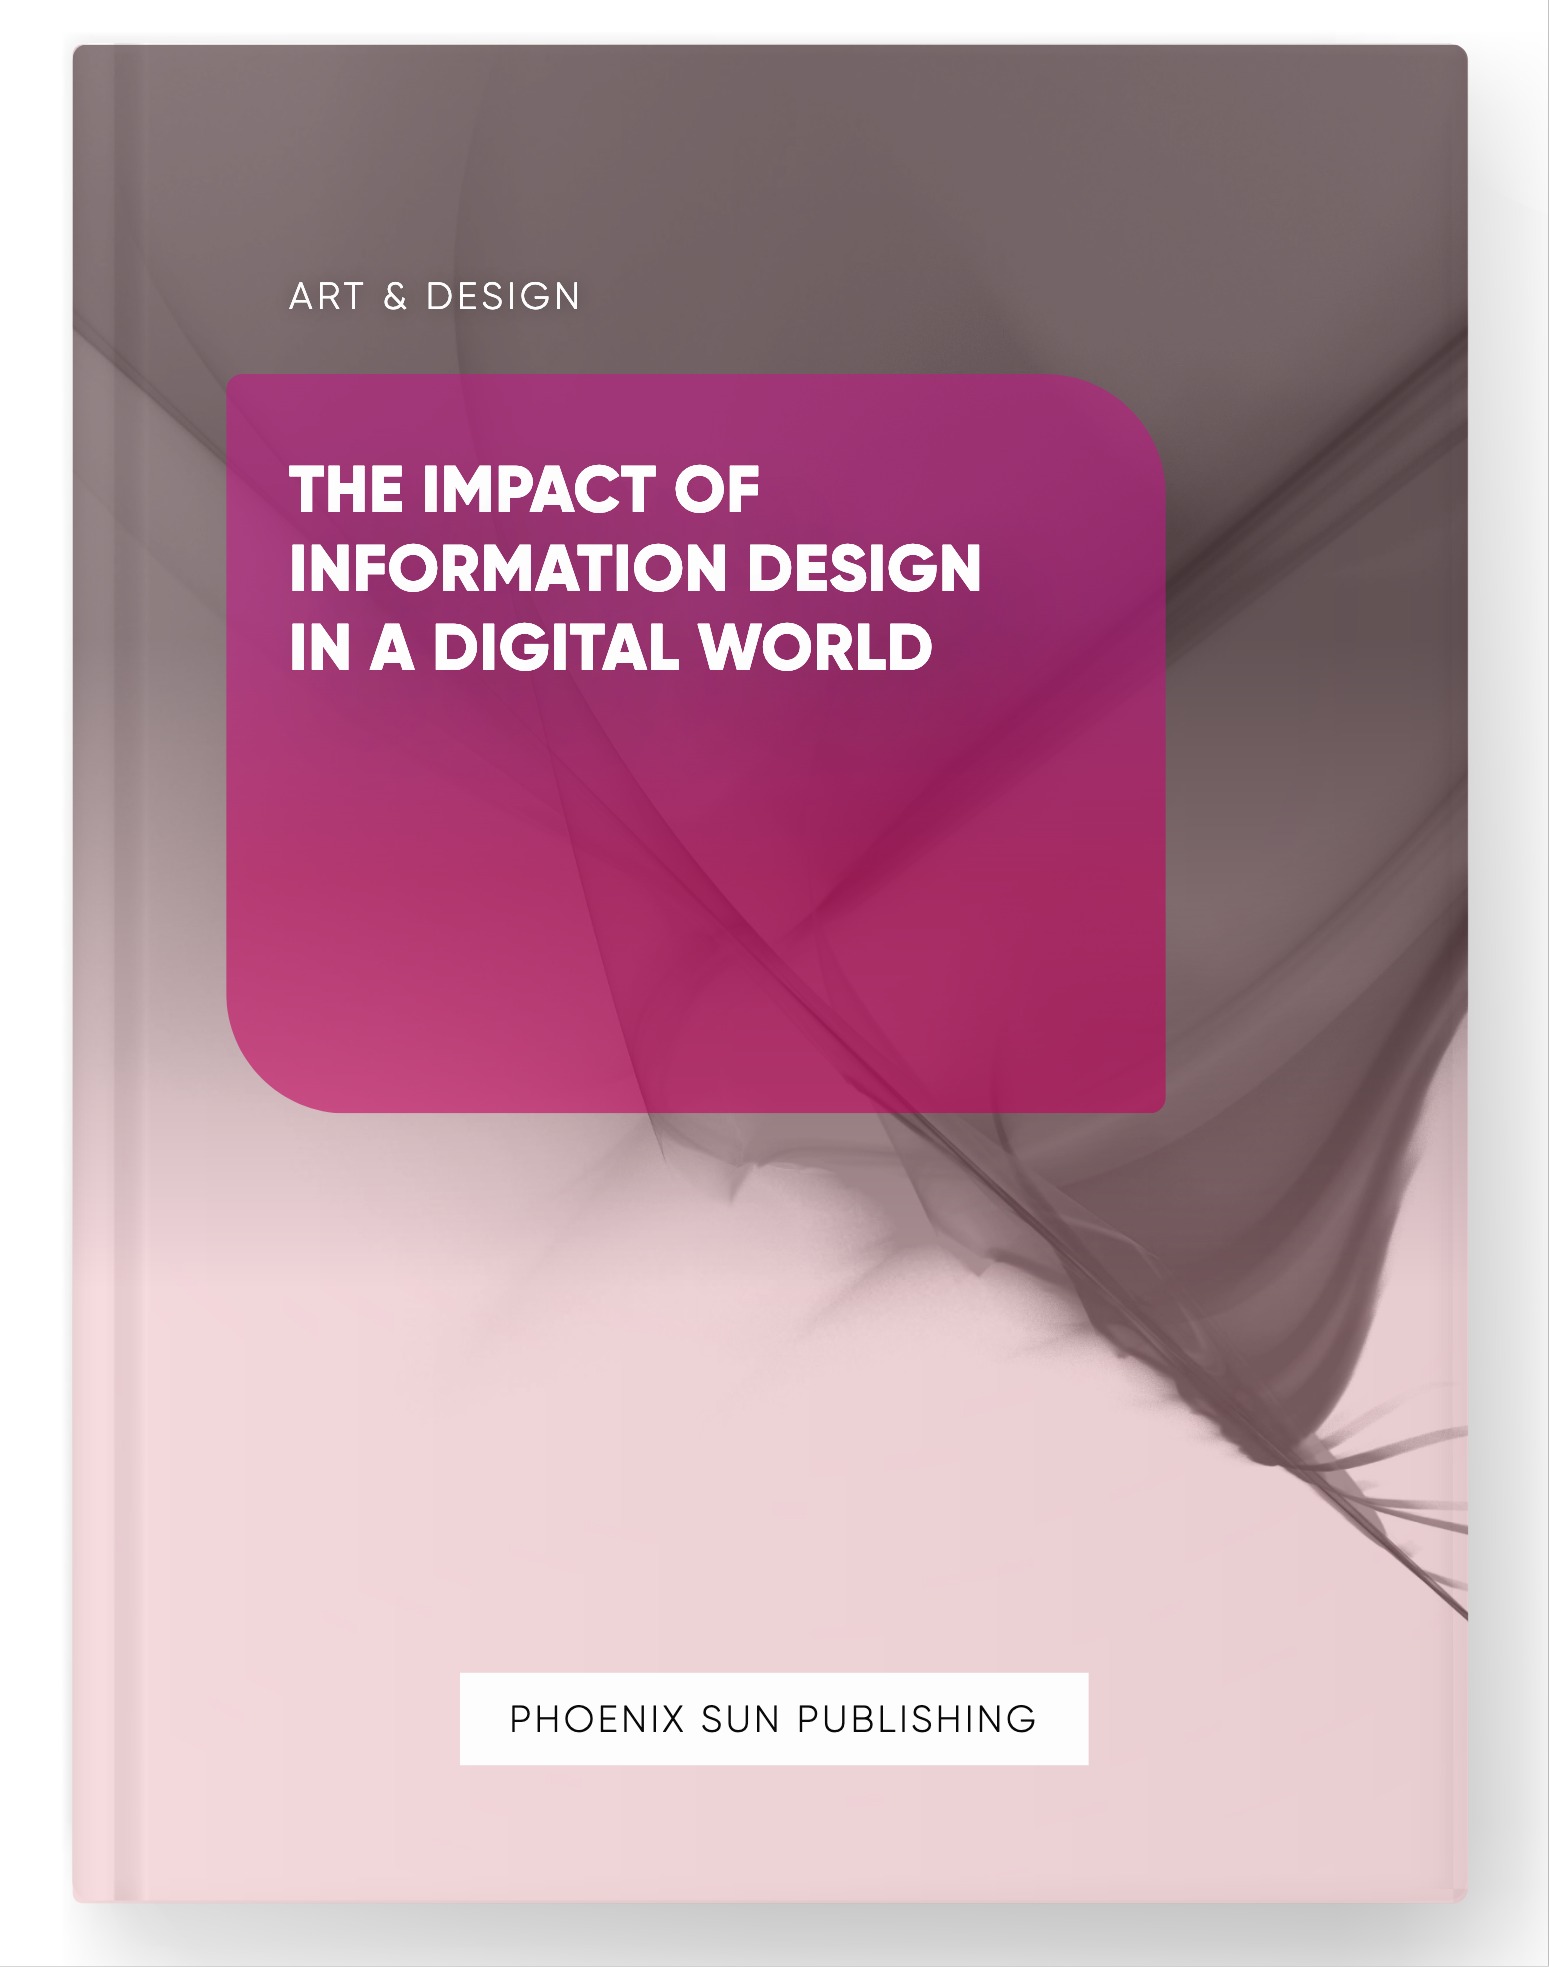 The Impact of Information Design in a Digital World